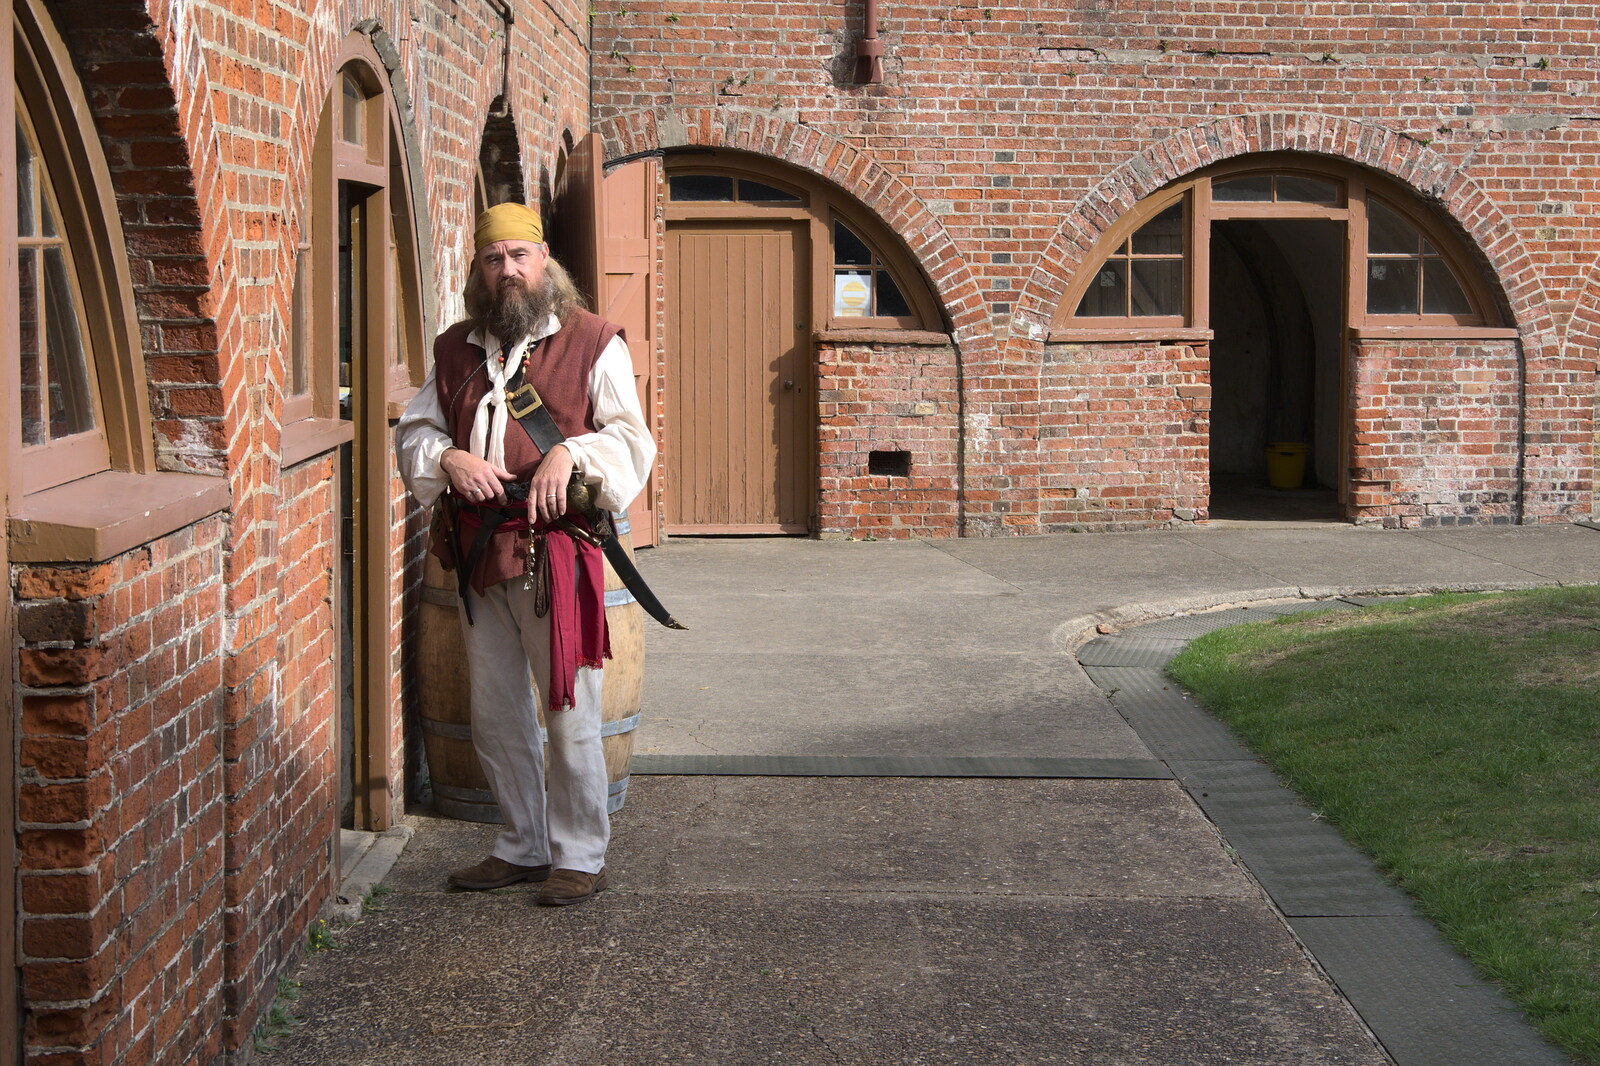 A dude dressed up in 18th-century gear from A Trip to Landguard Fort, Felixstowe, Suffolk - 16th October 2022